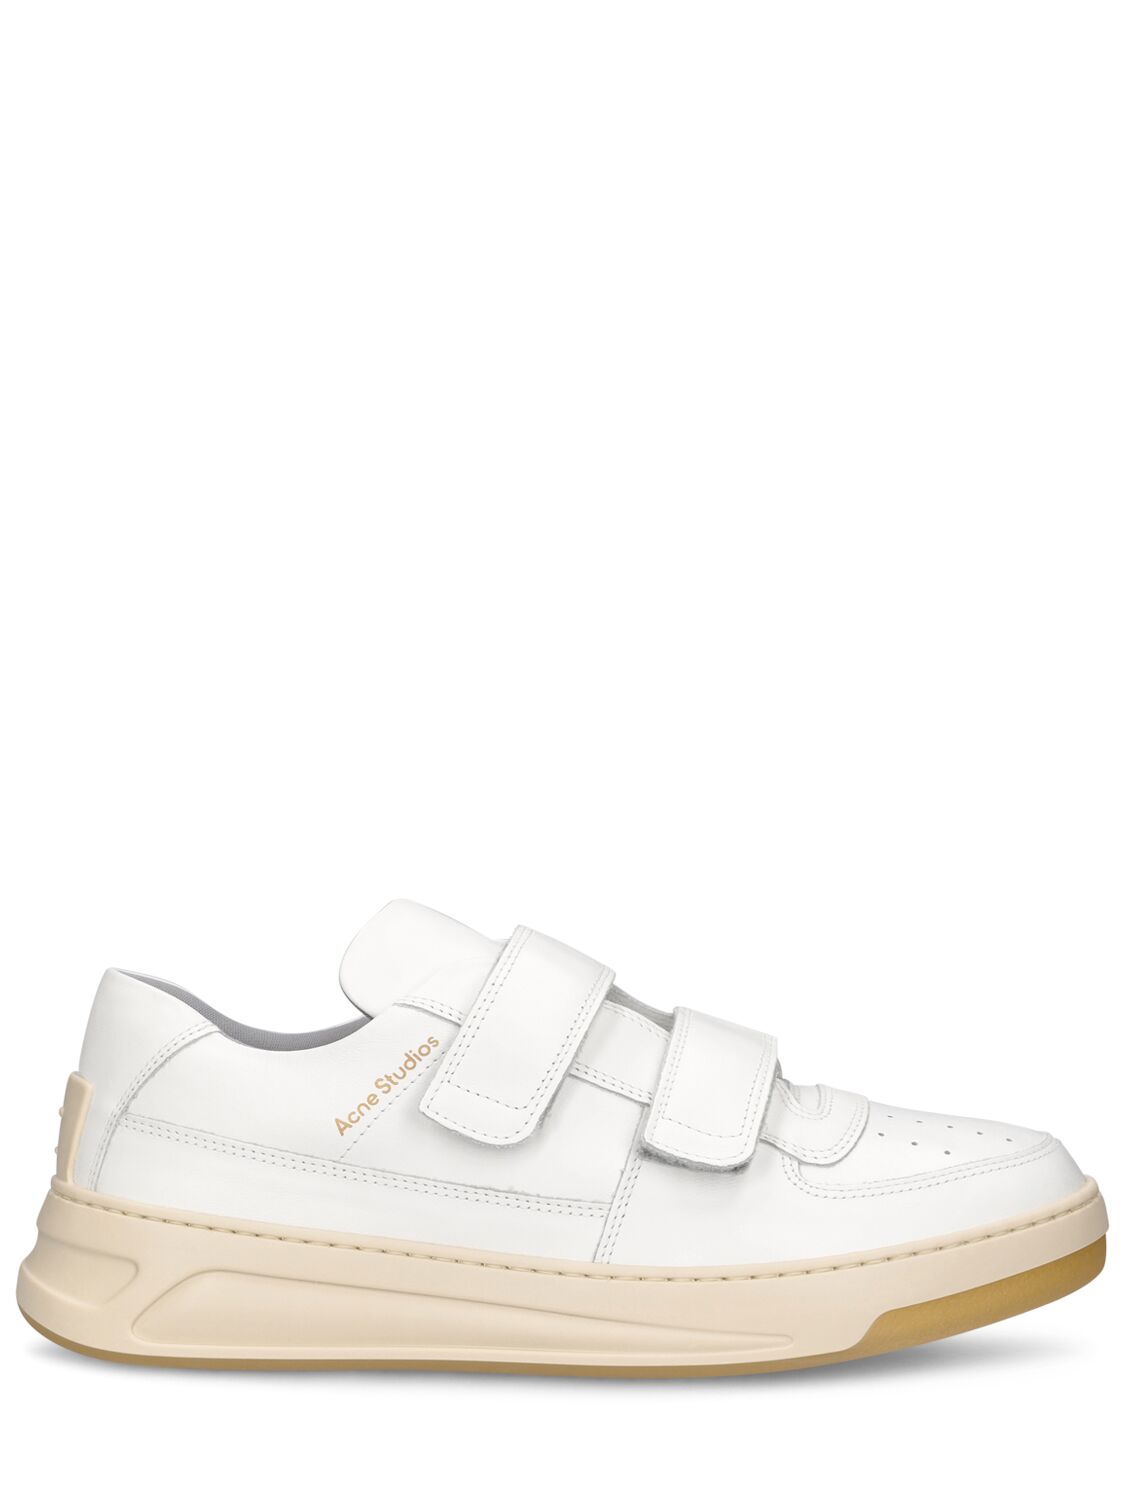 Acne Studios Perey Friend Leather Low Top Trainers In 화이트